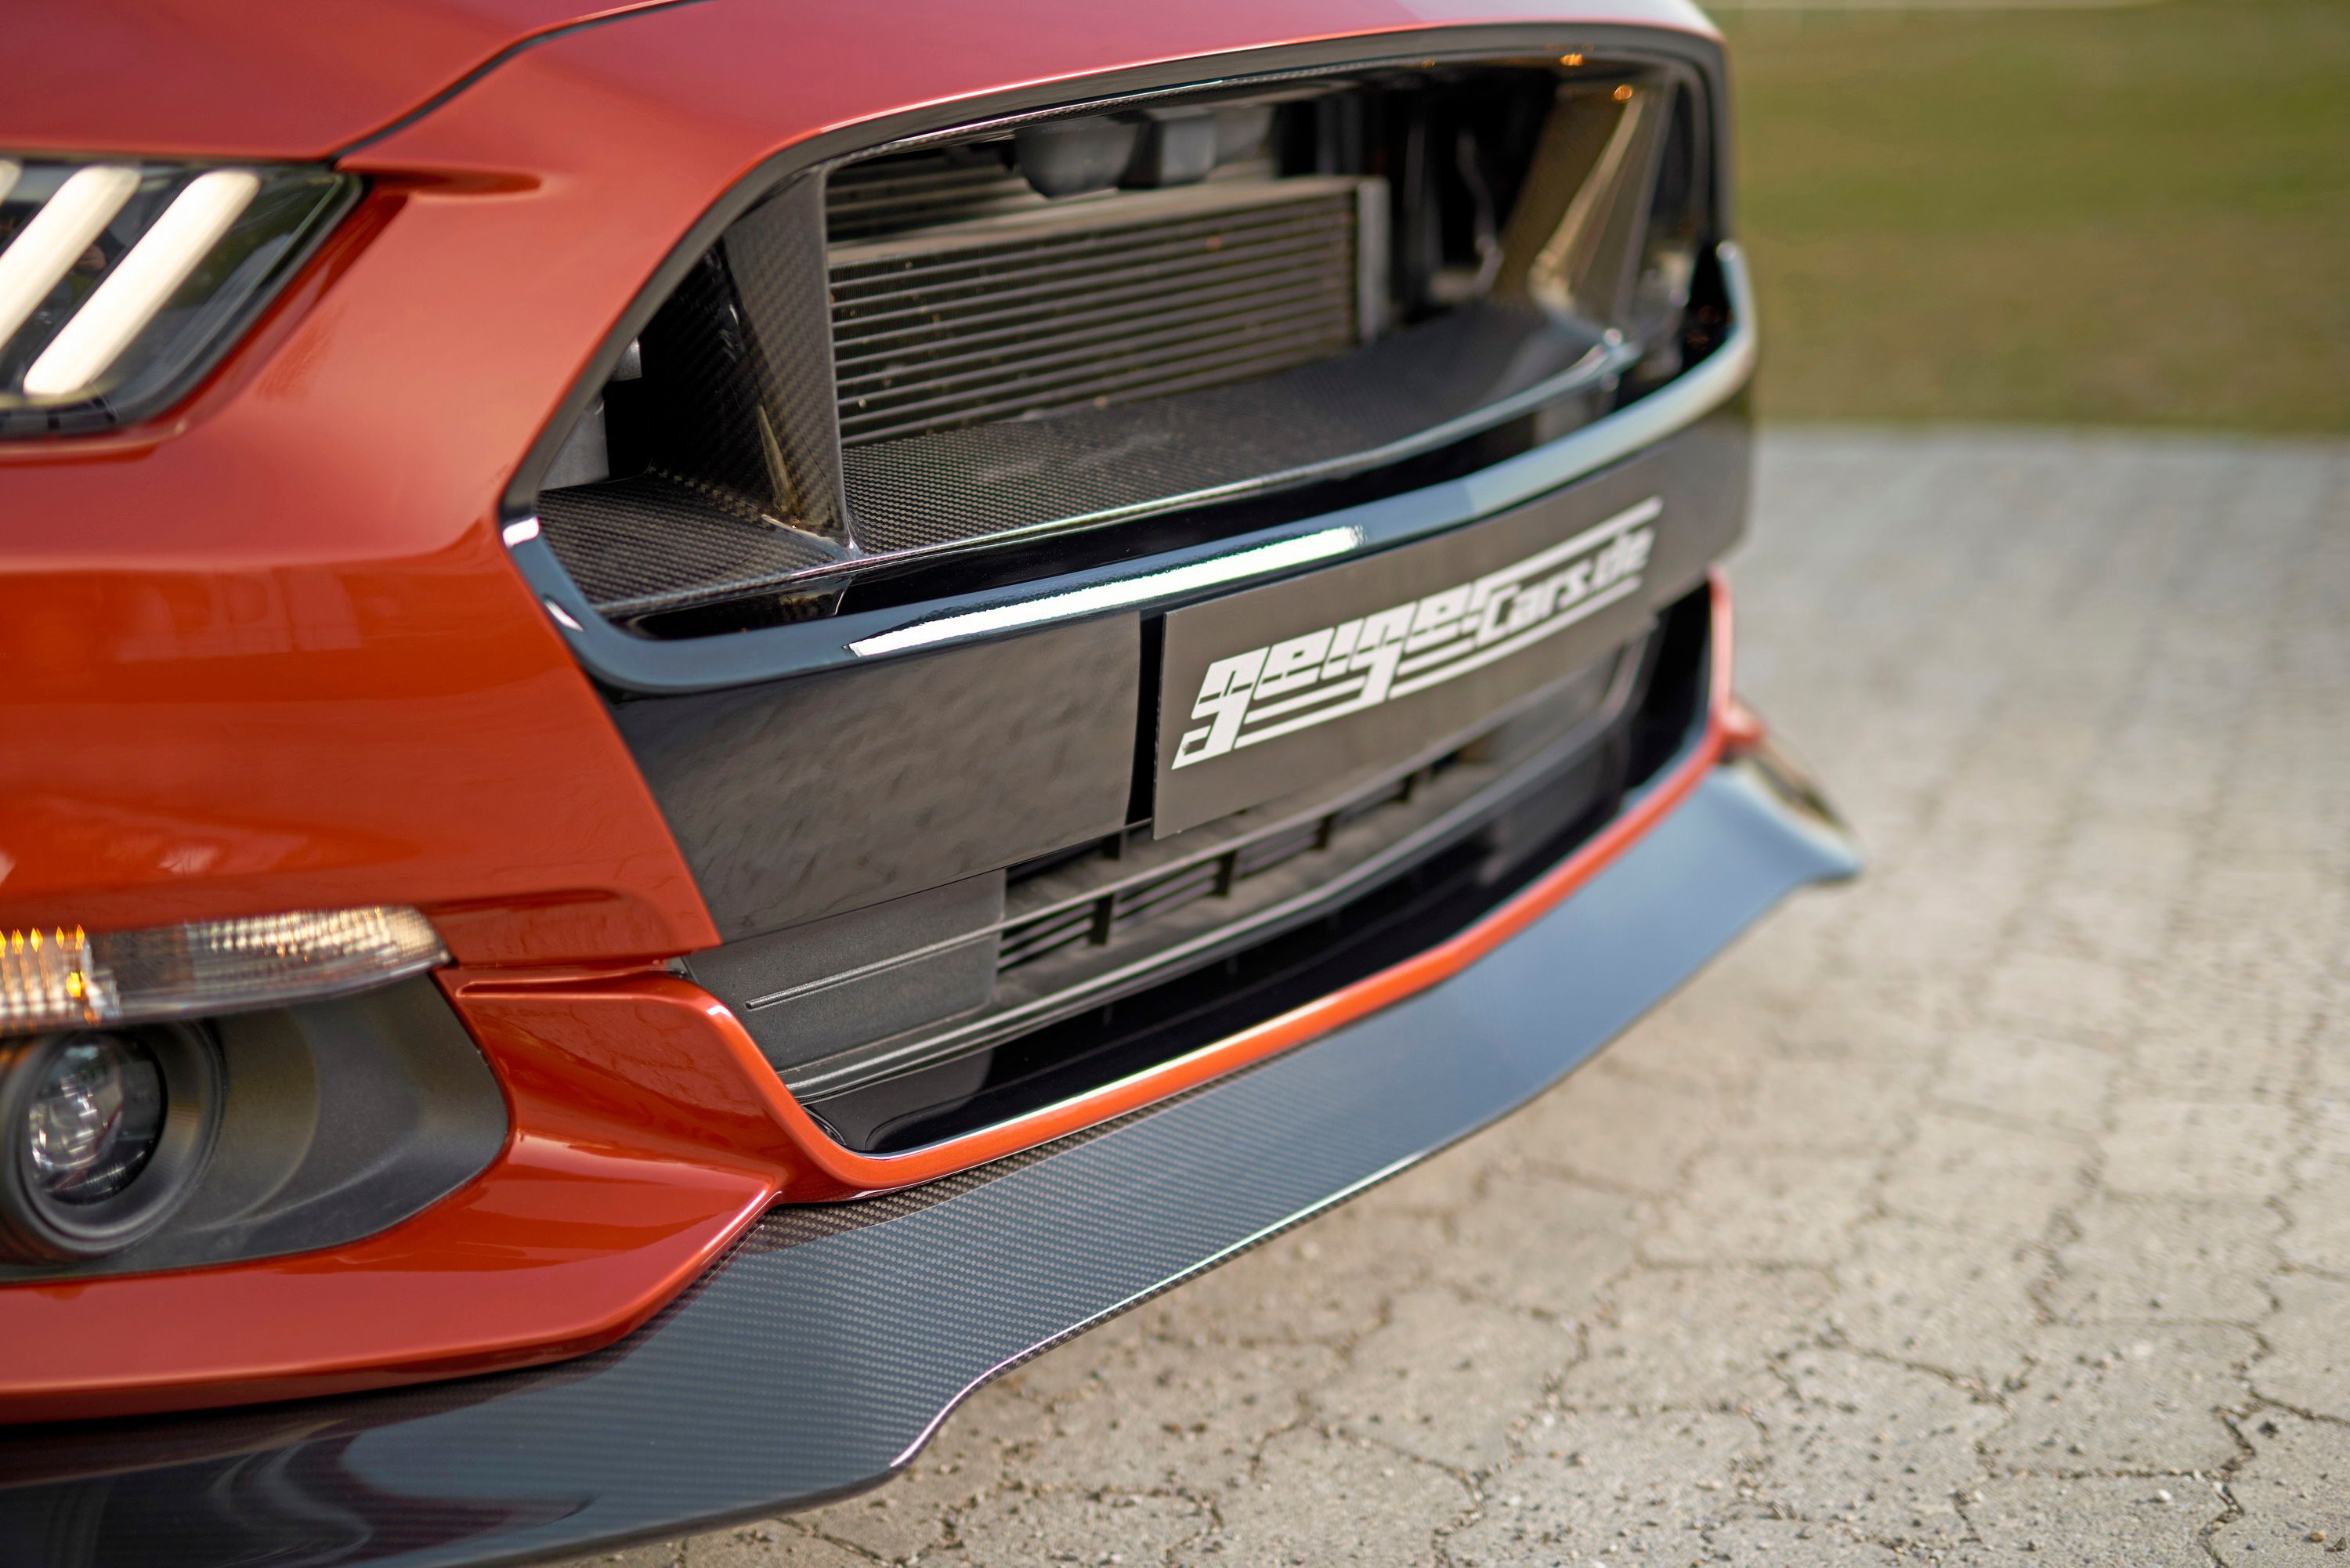 2016 Ford Mustang GT 820 By Geiger Cars